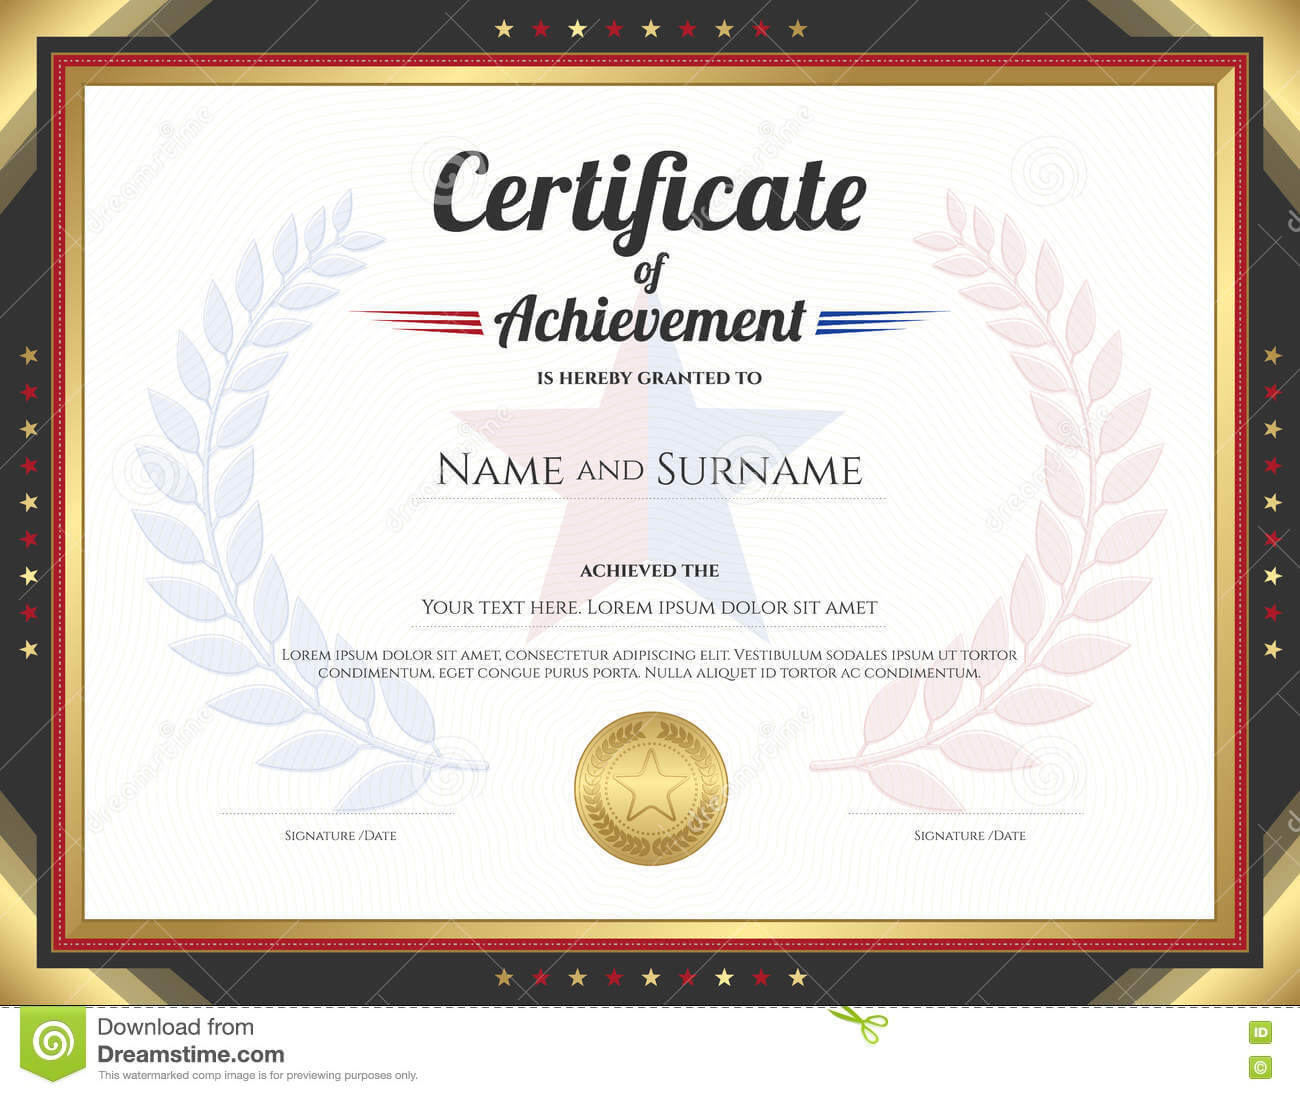 Certificate Of Achievement Template With Gold Border Theme With Star Naming Certificate Template